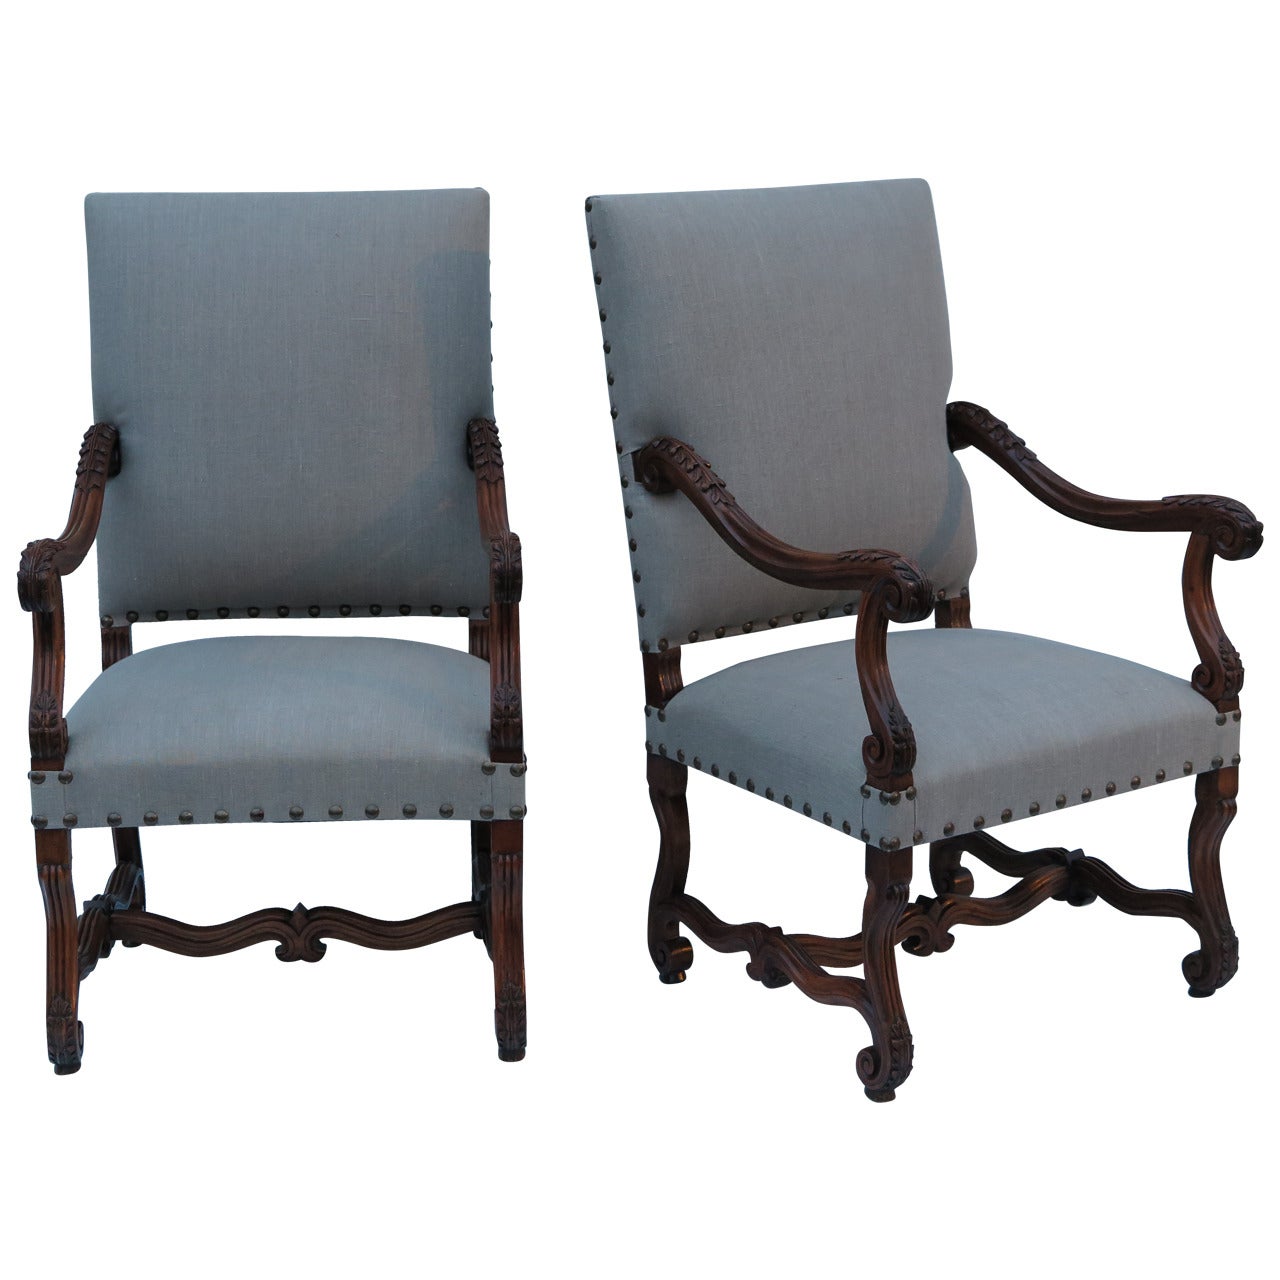 Pair of Fauteuils For Sale